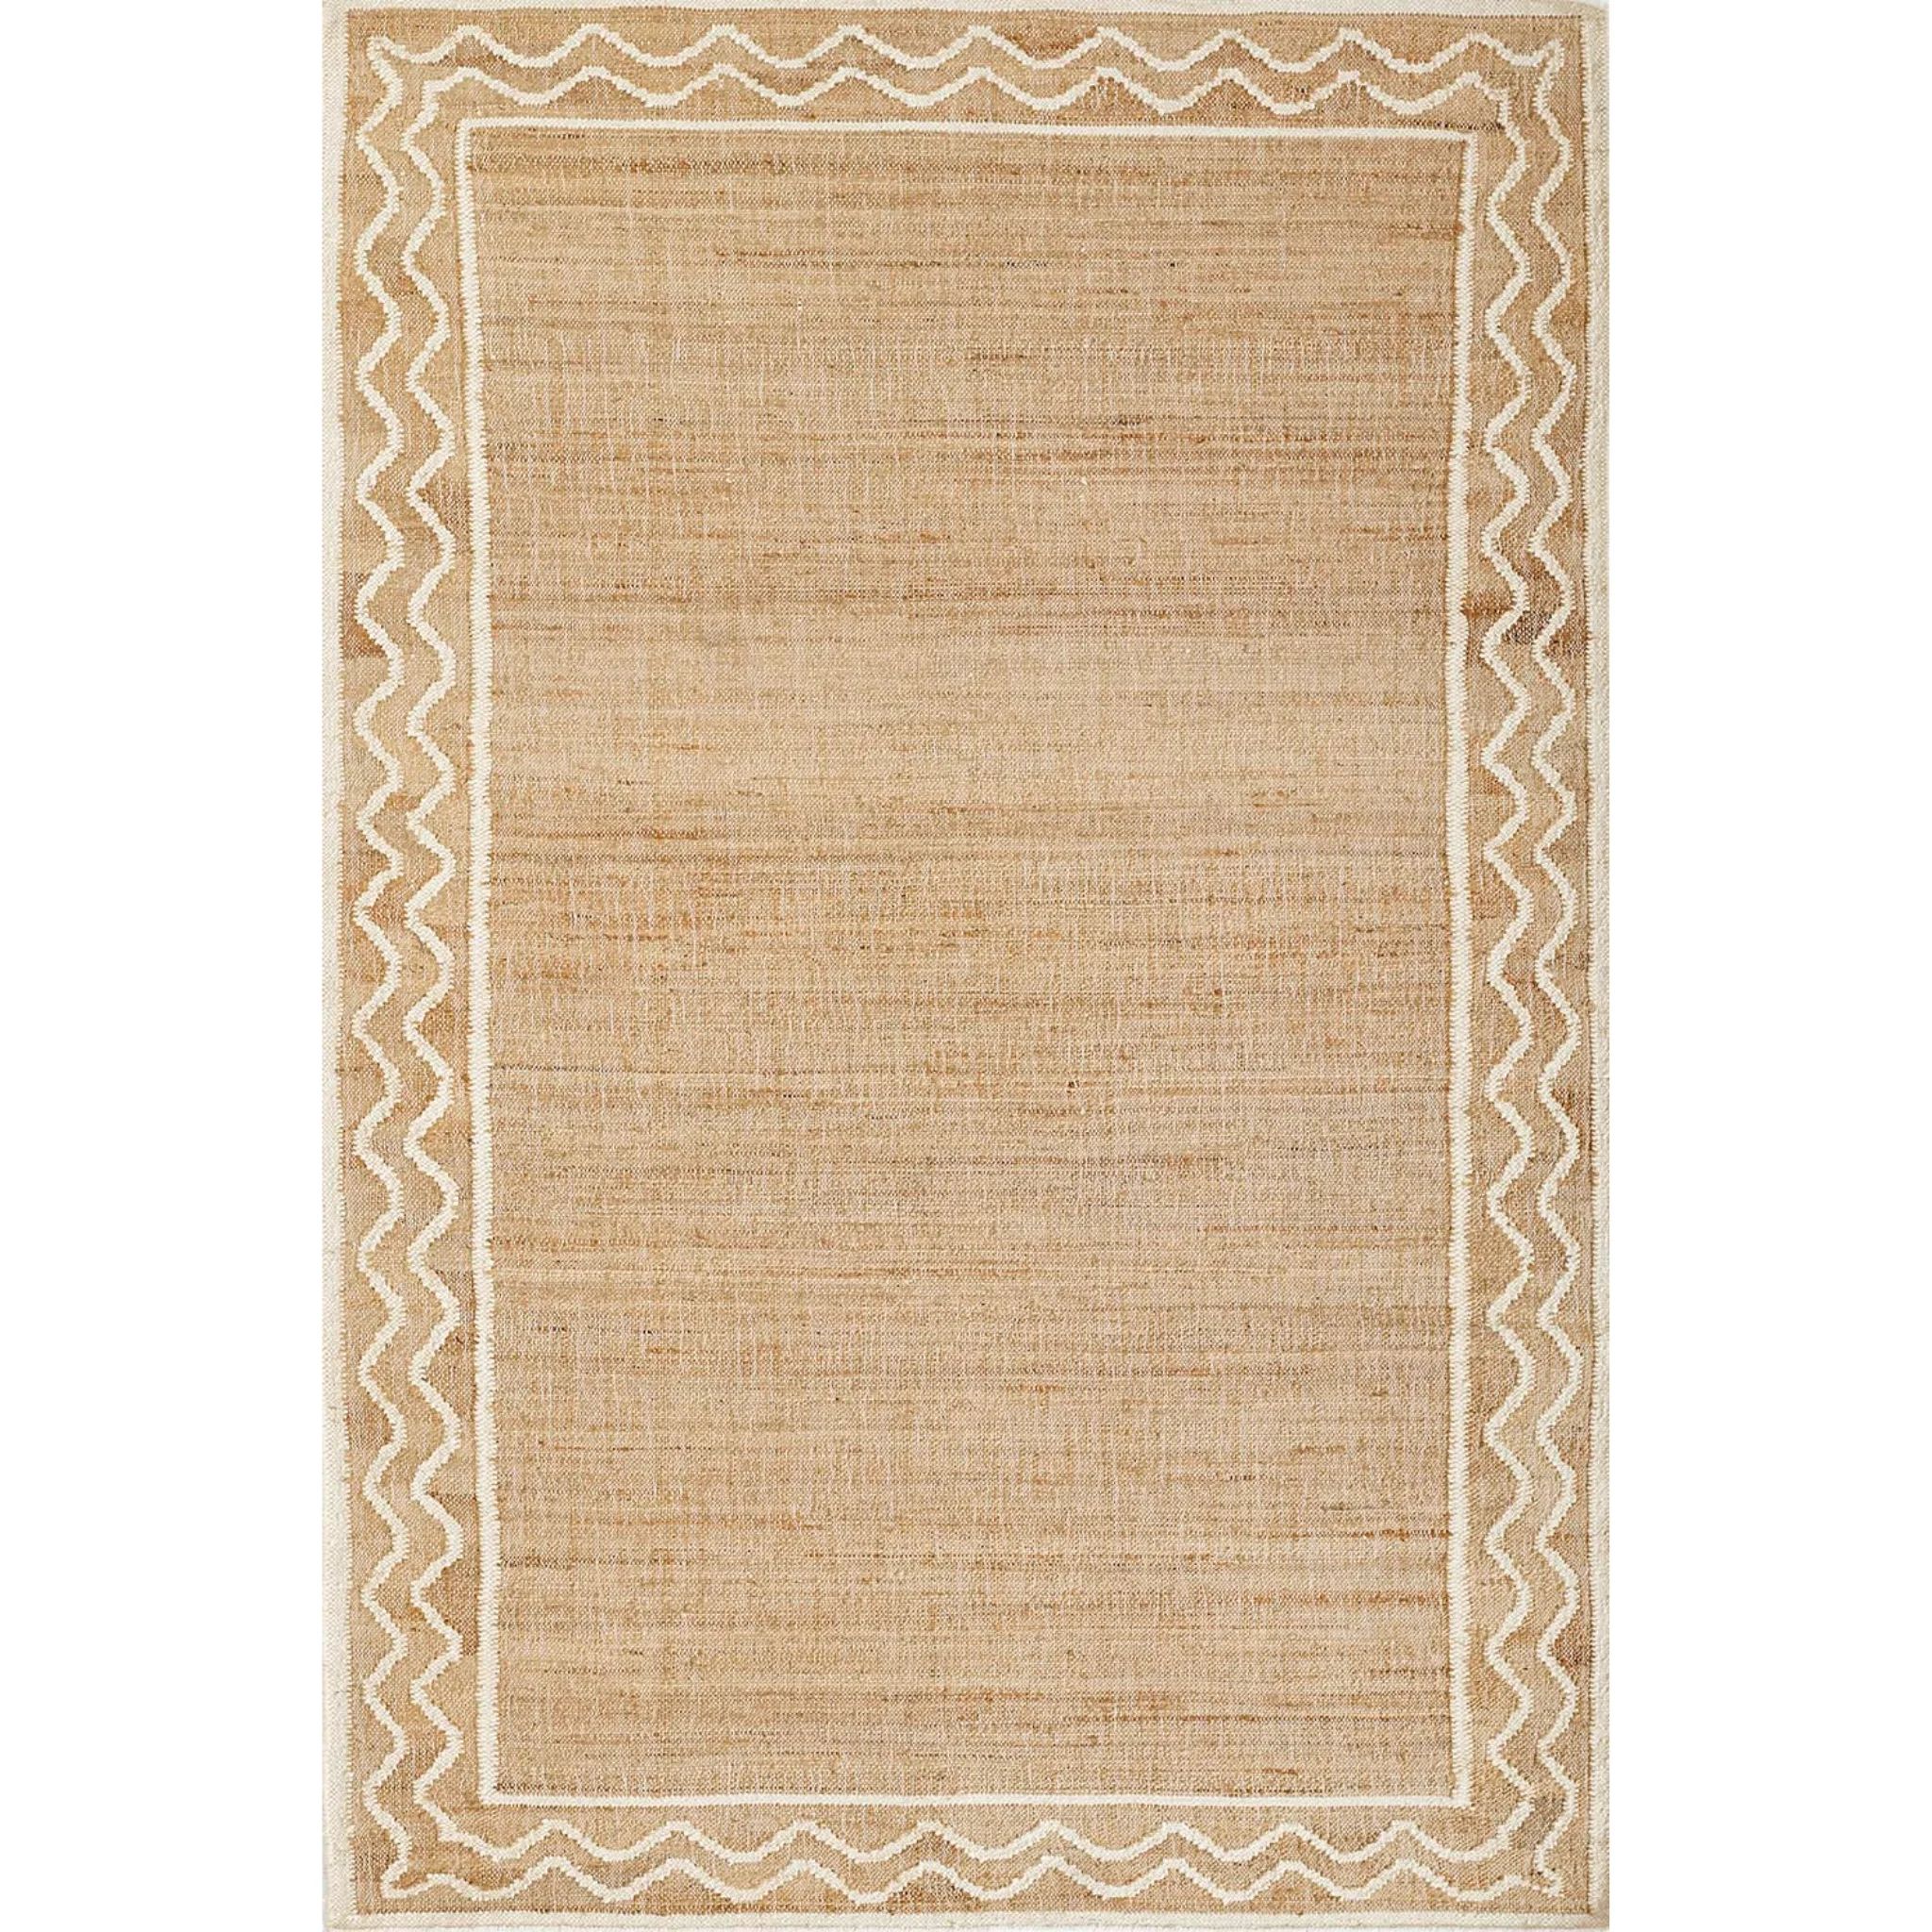 Erin Gates by Momeni Orchard Ripple Rug | Mintwood Home